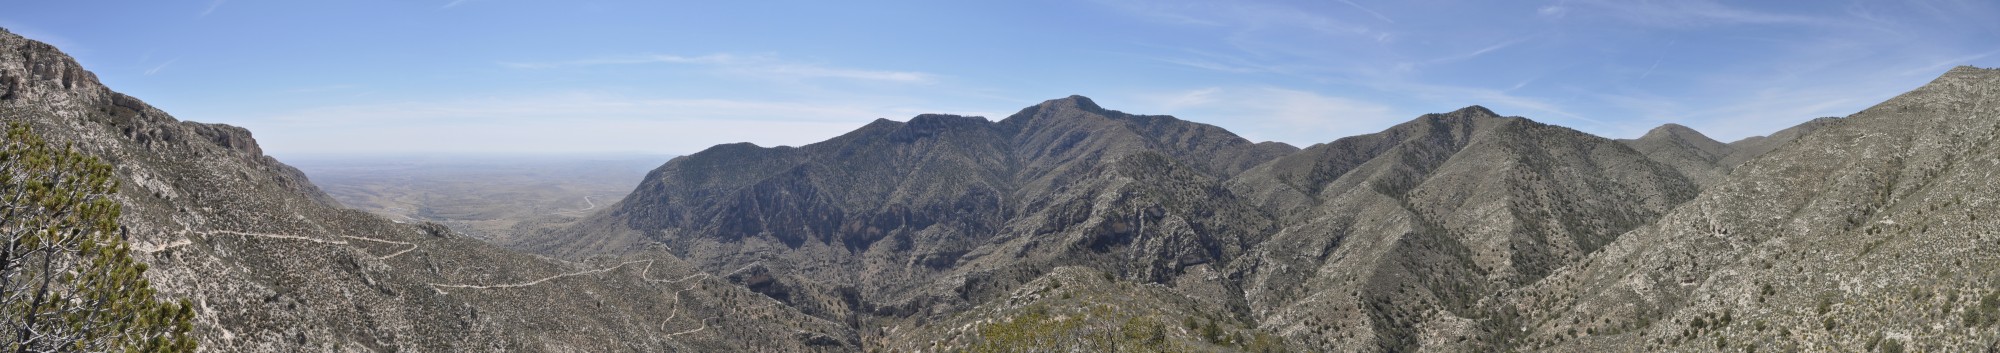 Guadalupe Mountains March 2014